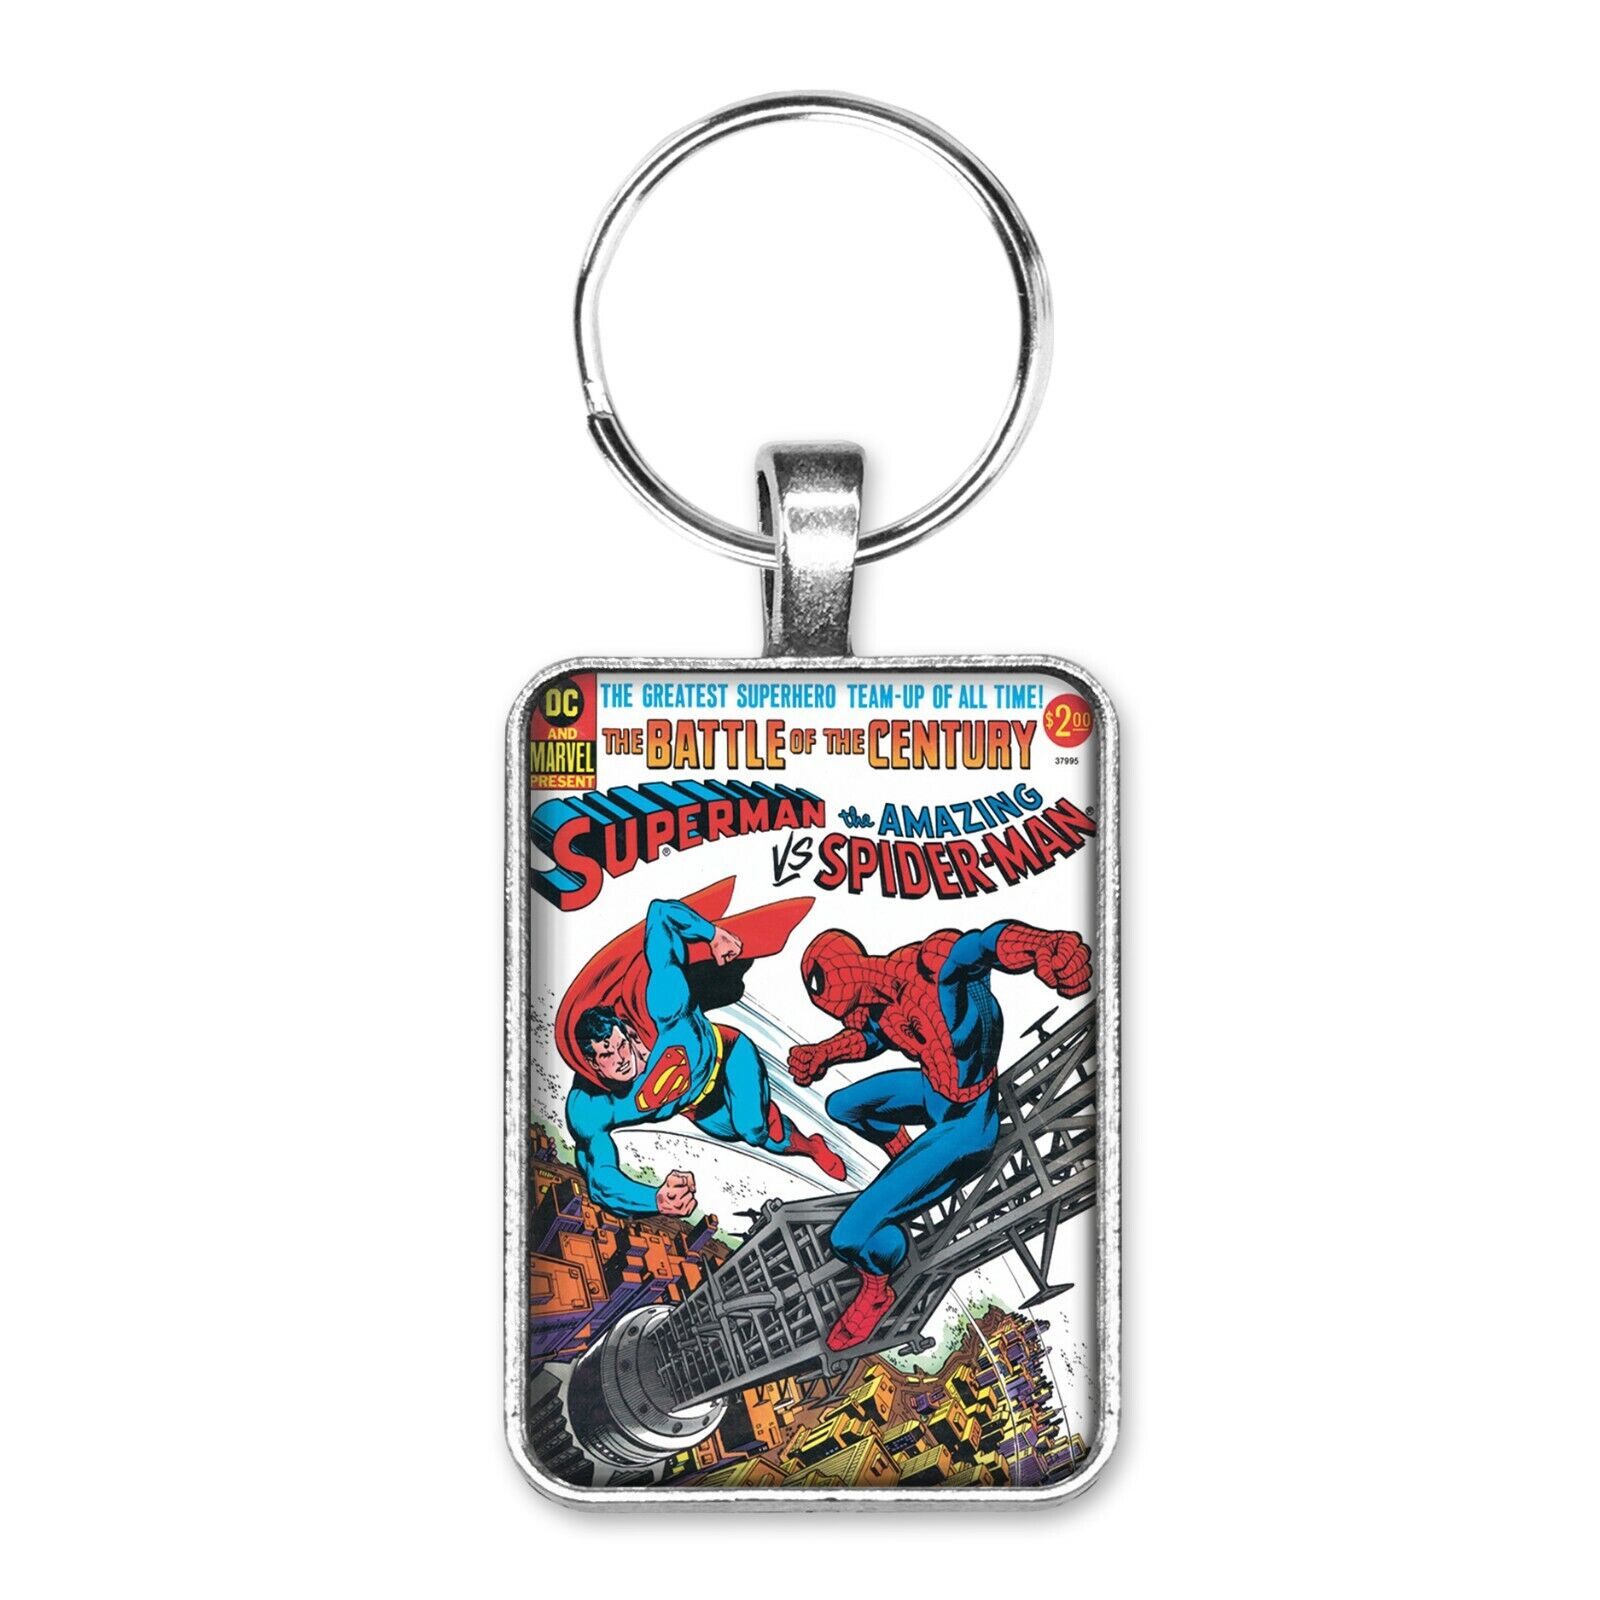 Superman Versus Spider-Man Cover Key Ring or Necklace Classic Comic Book Jewelry